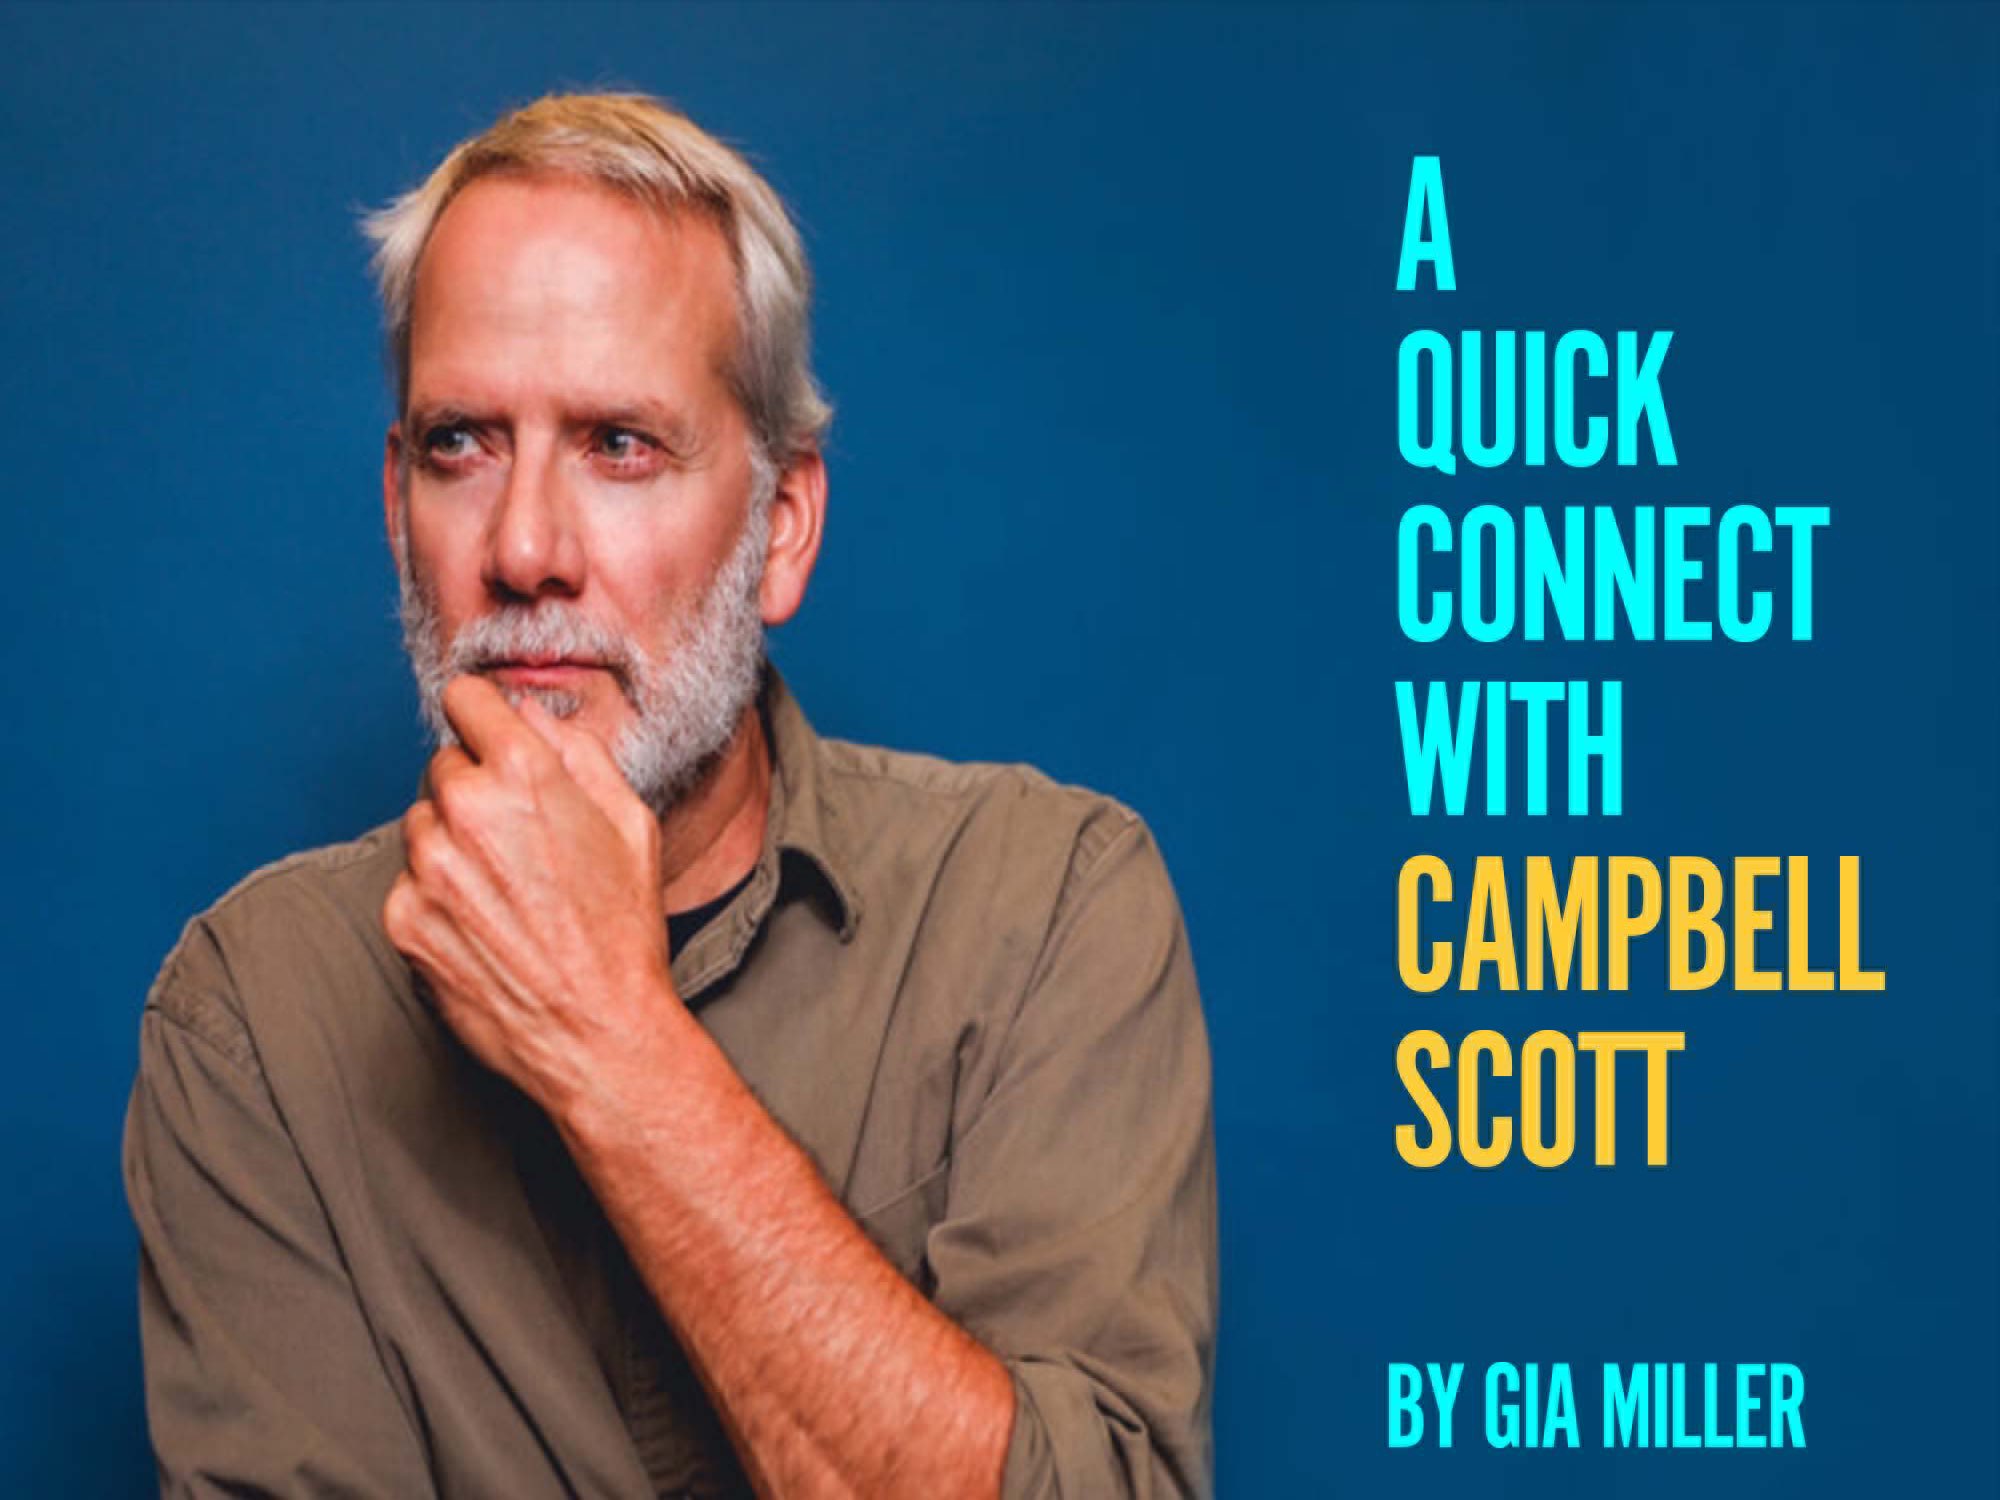 A Quick Connect with Campbell Scott